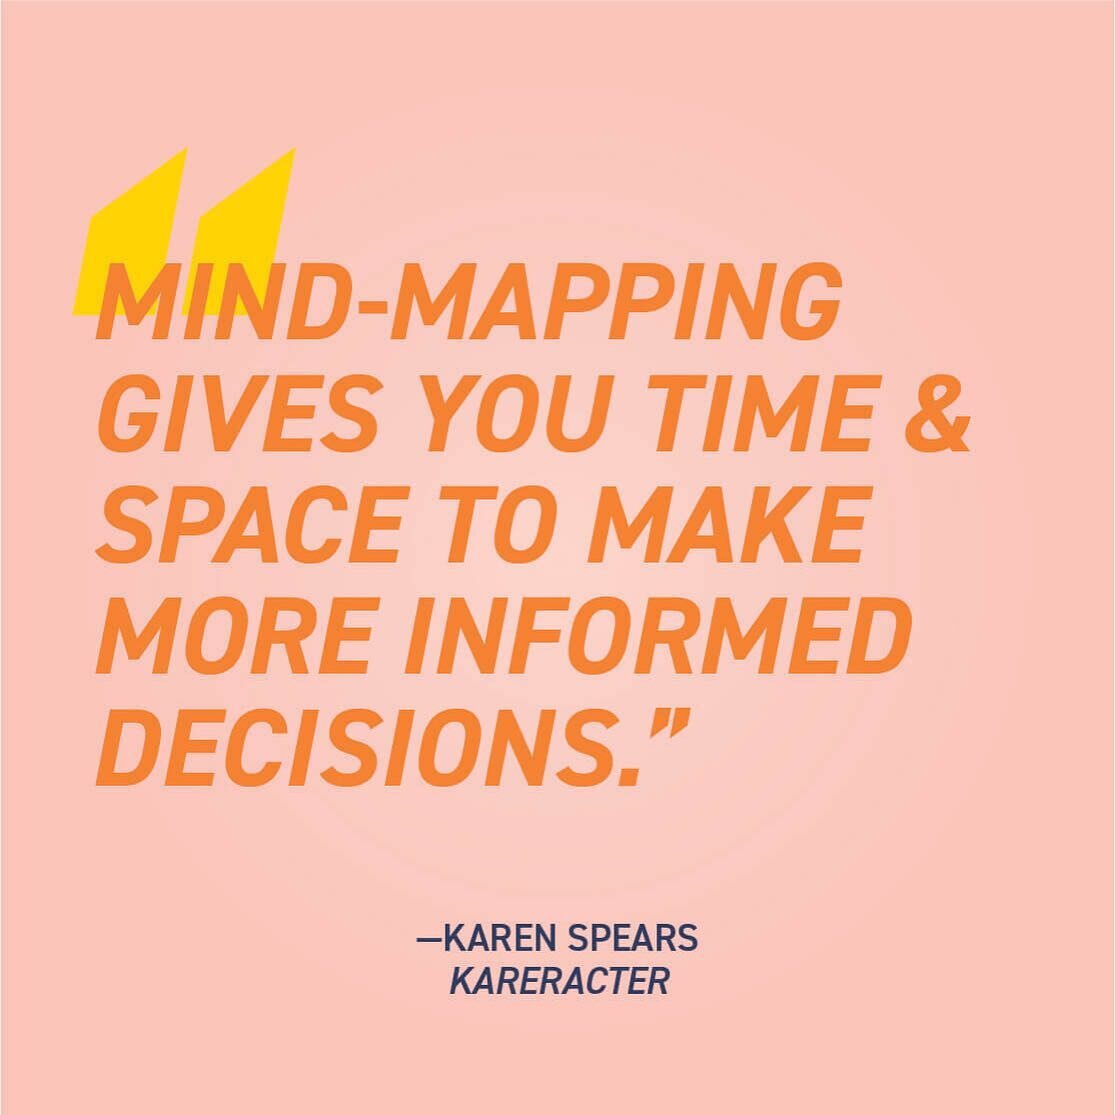 As a business owner you&rsquo;re constantly making decisions so this quote and benefit of mind-mapping certainly stood out in our chat with Karen of @kareracter last week. 

Other benefits and applications for mind-mapping include but are certainly n